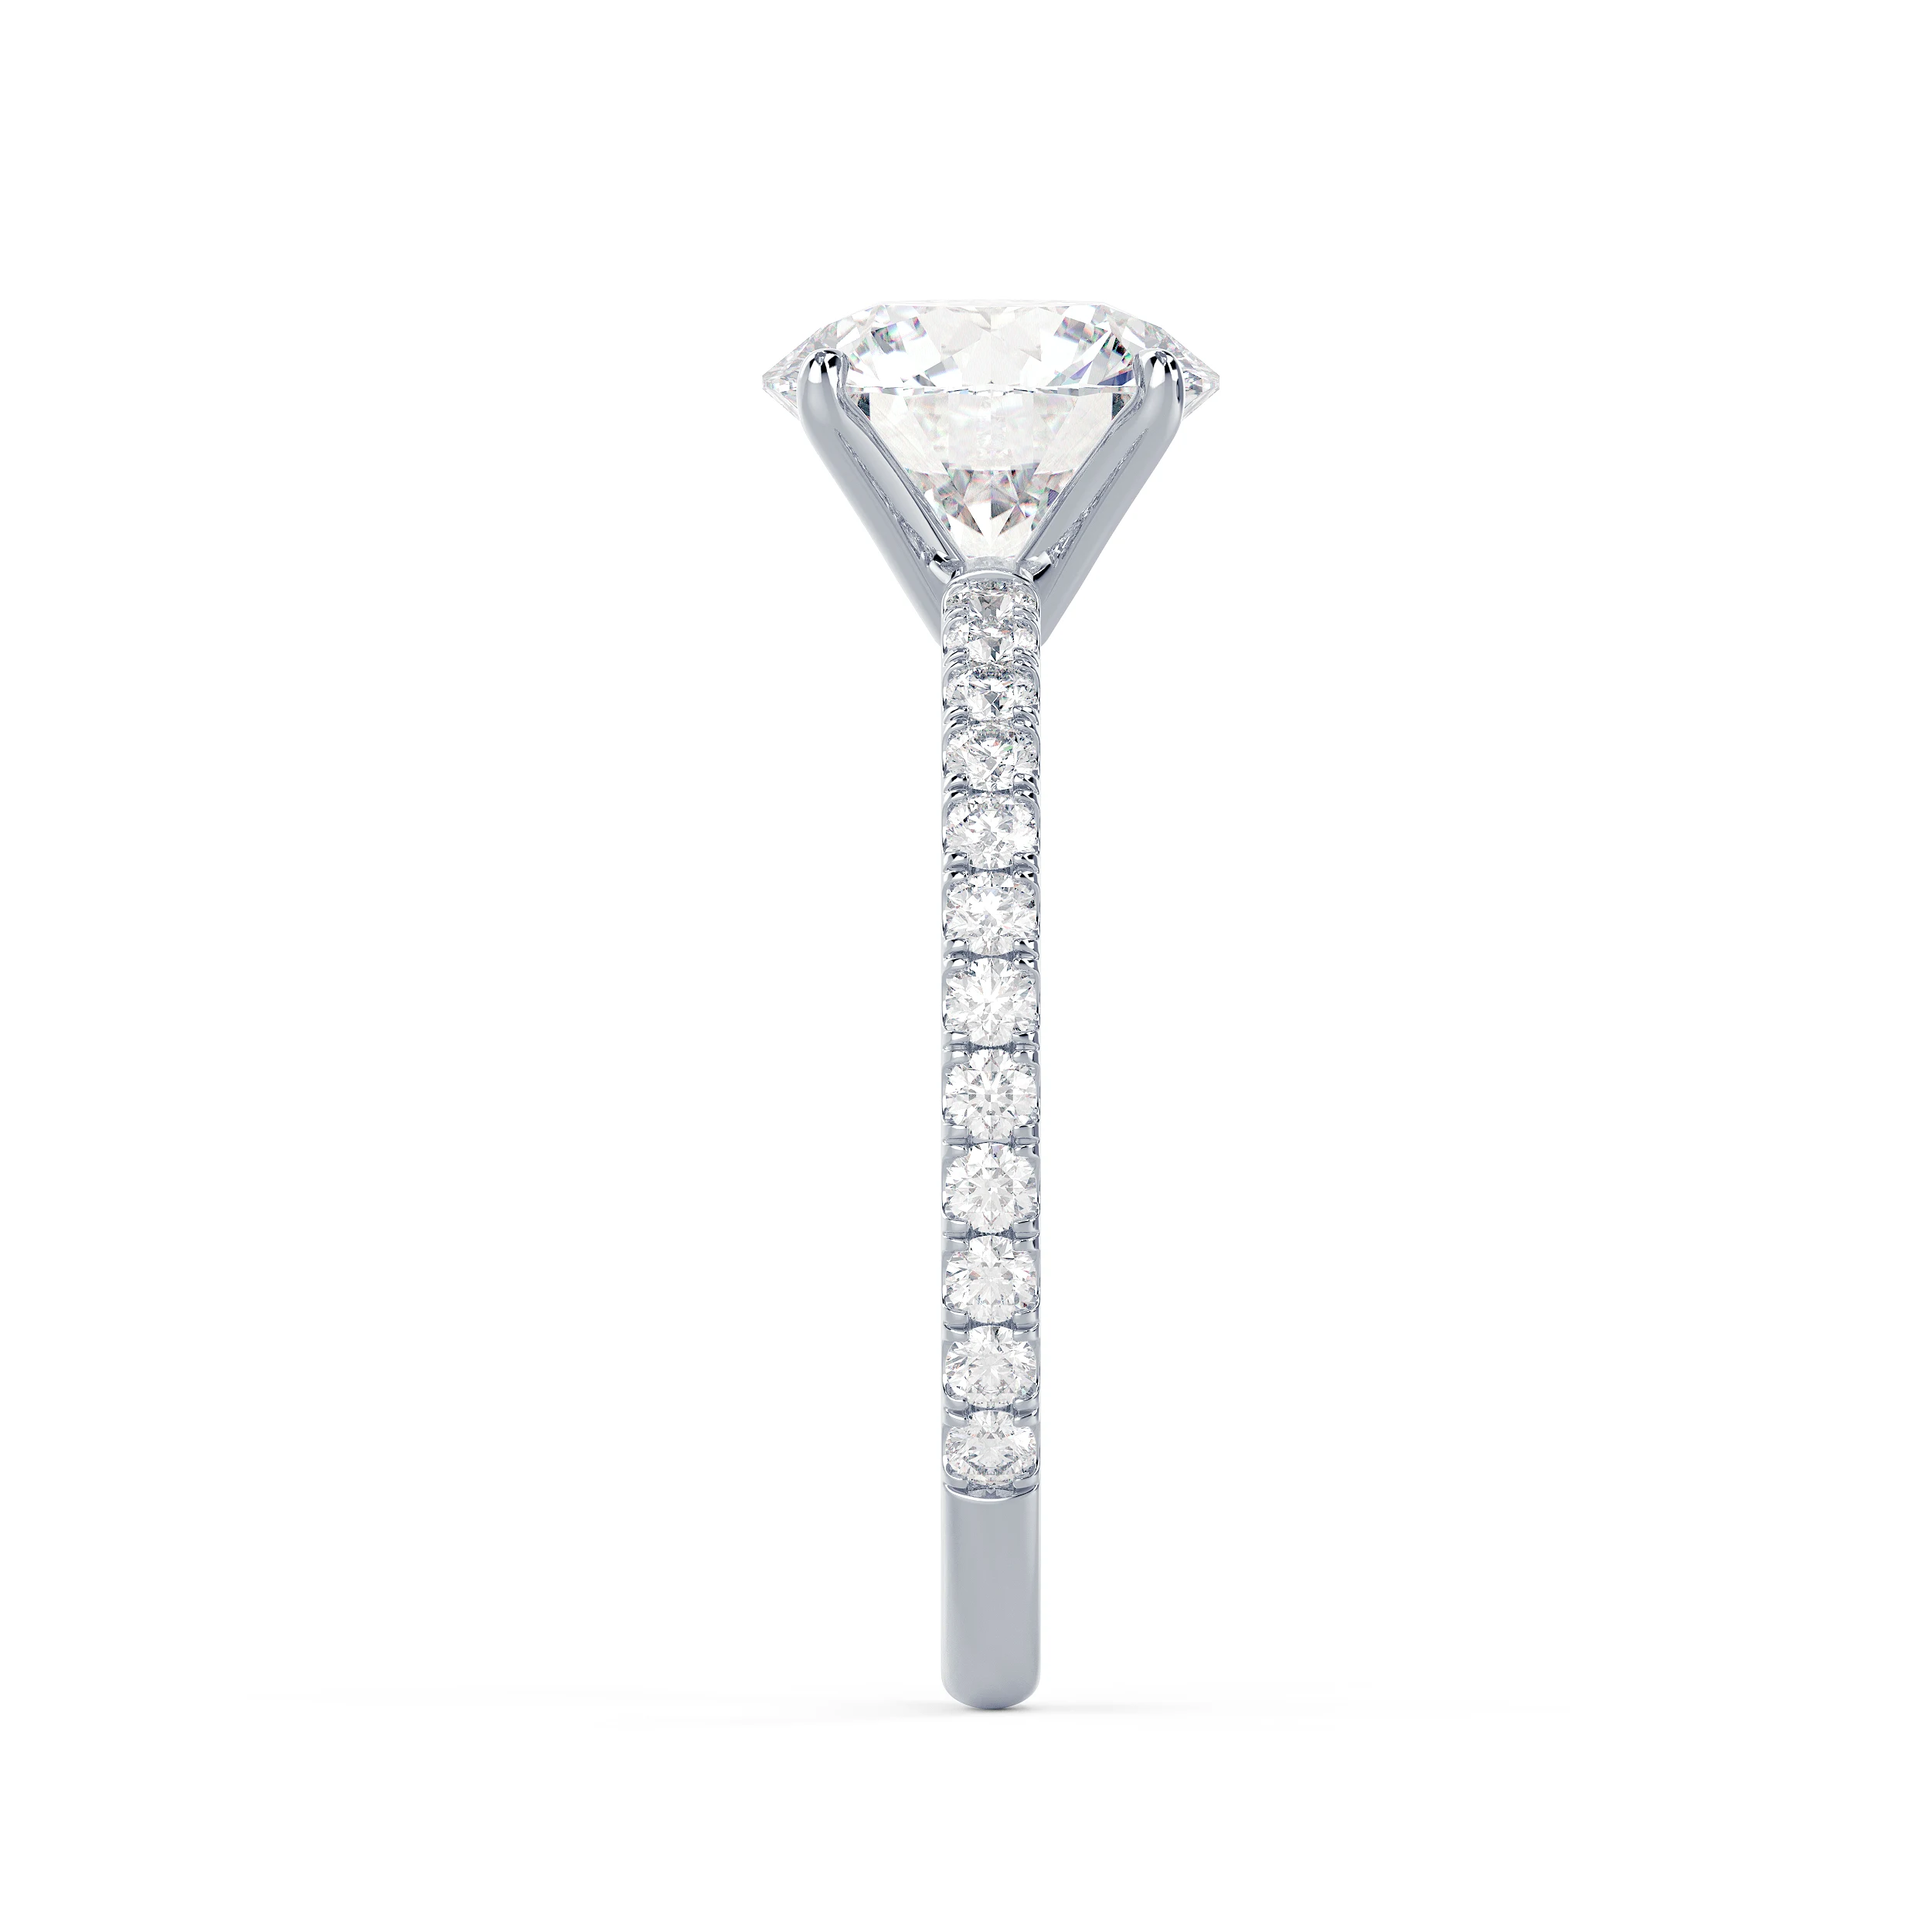 High Quality Diamonds set in White Gold Round Classic Four Prong Pavé Diamond Engagement Ring (Side View)